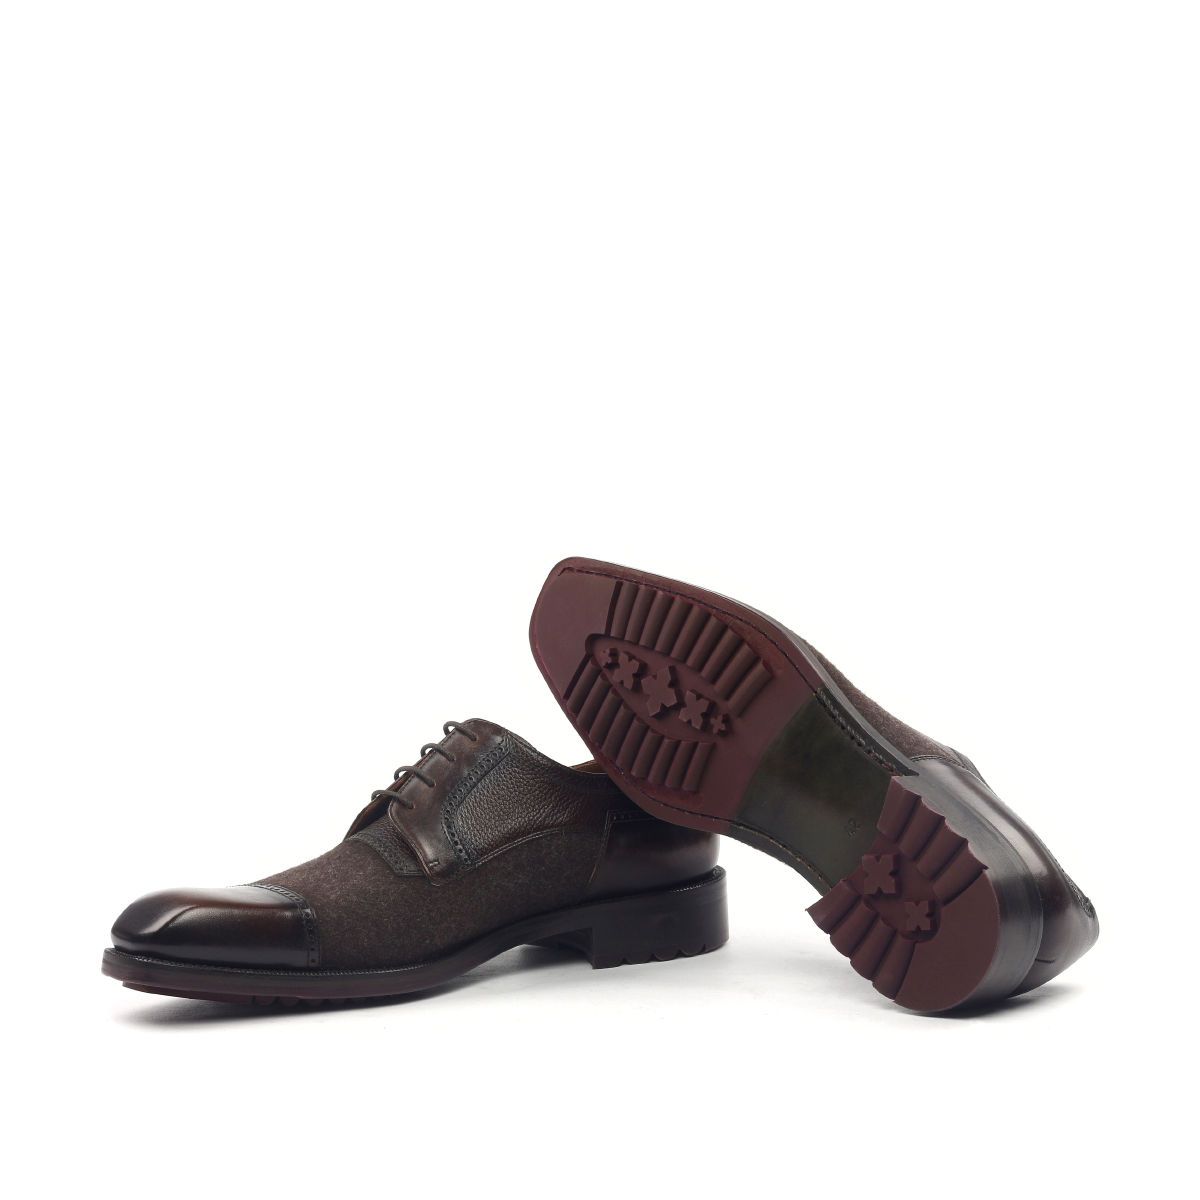 Omine Perforated Details Cap Toe Derby